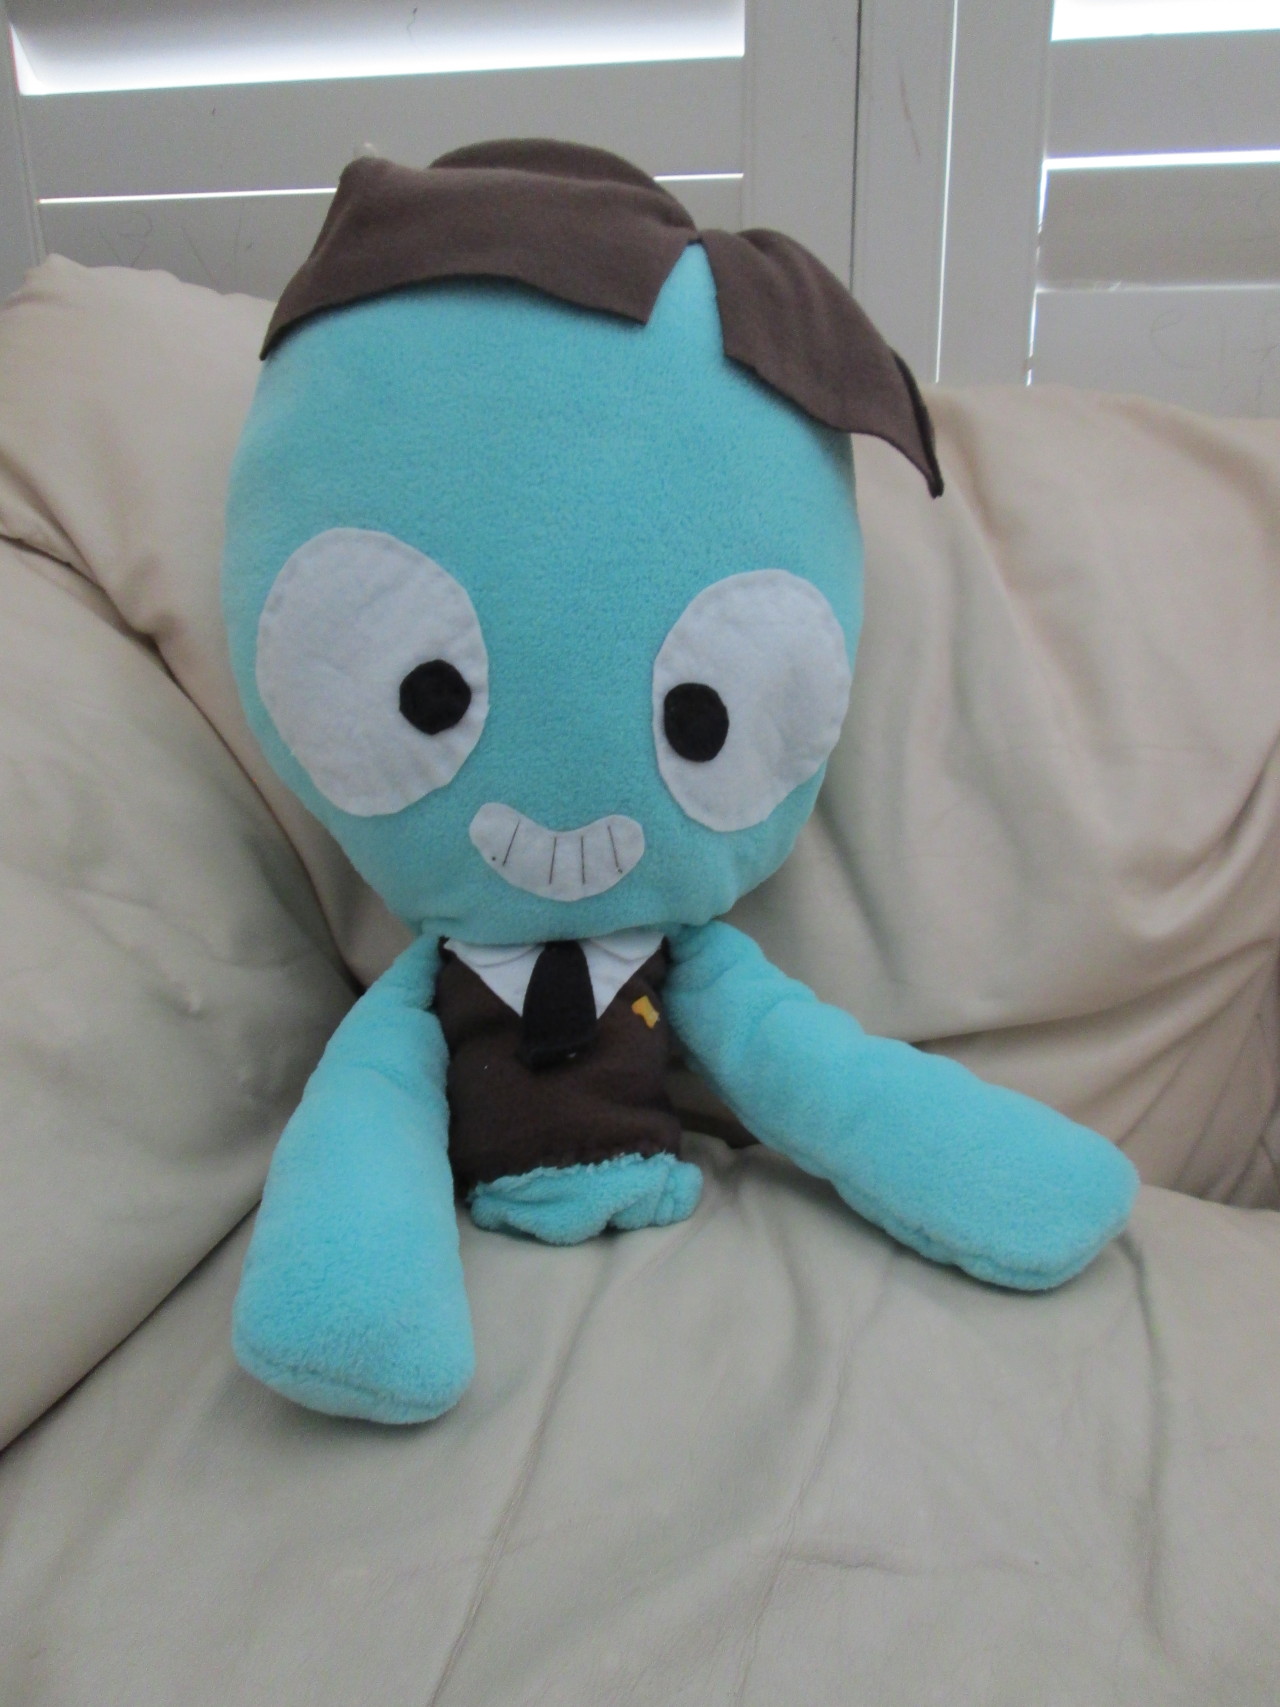 F Yeah, Fish Hooks! — toldentops: Plush I made recently! He's